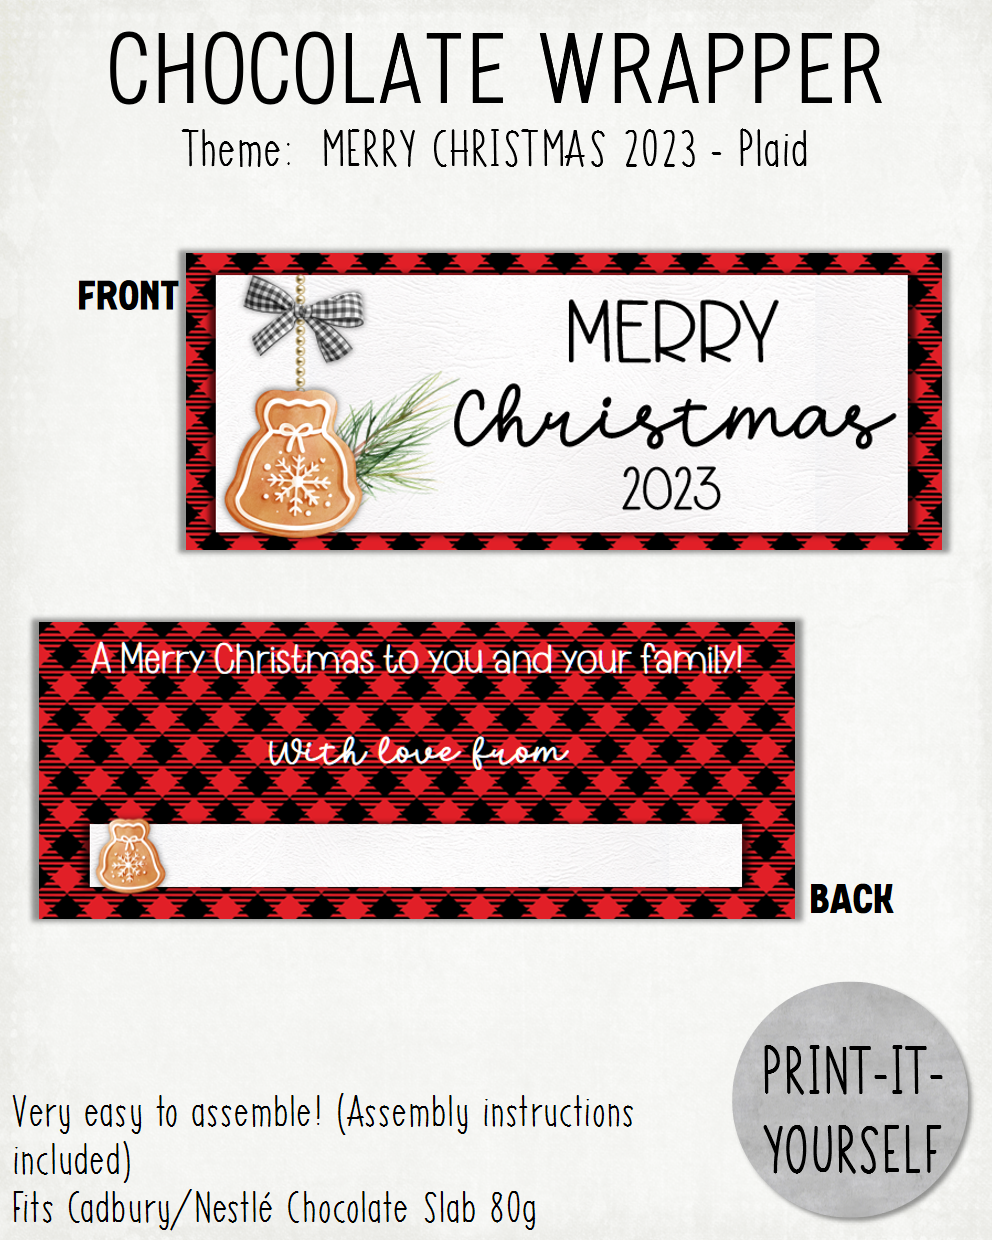 READY TO PRINT:  Merry Christmas 2023 Chocolate Wrapper - Plaid